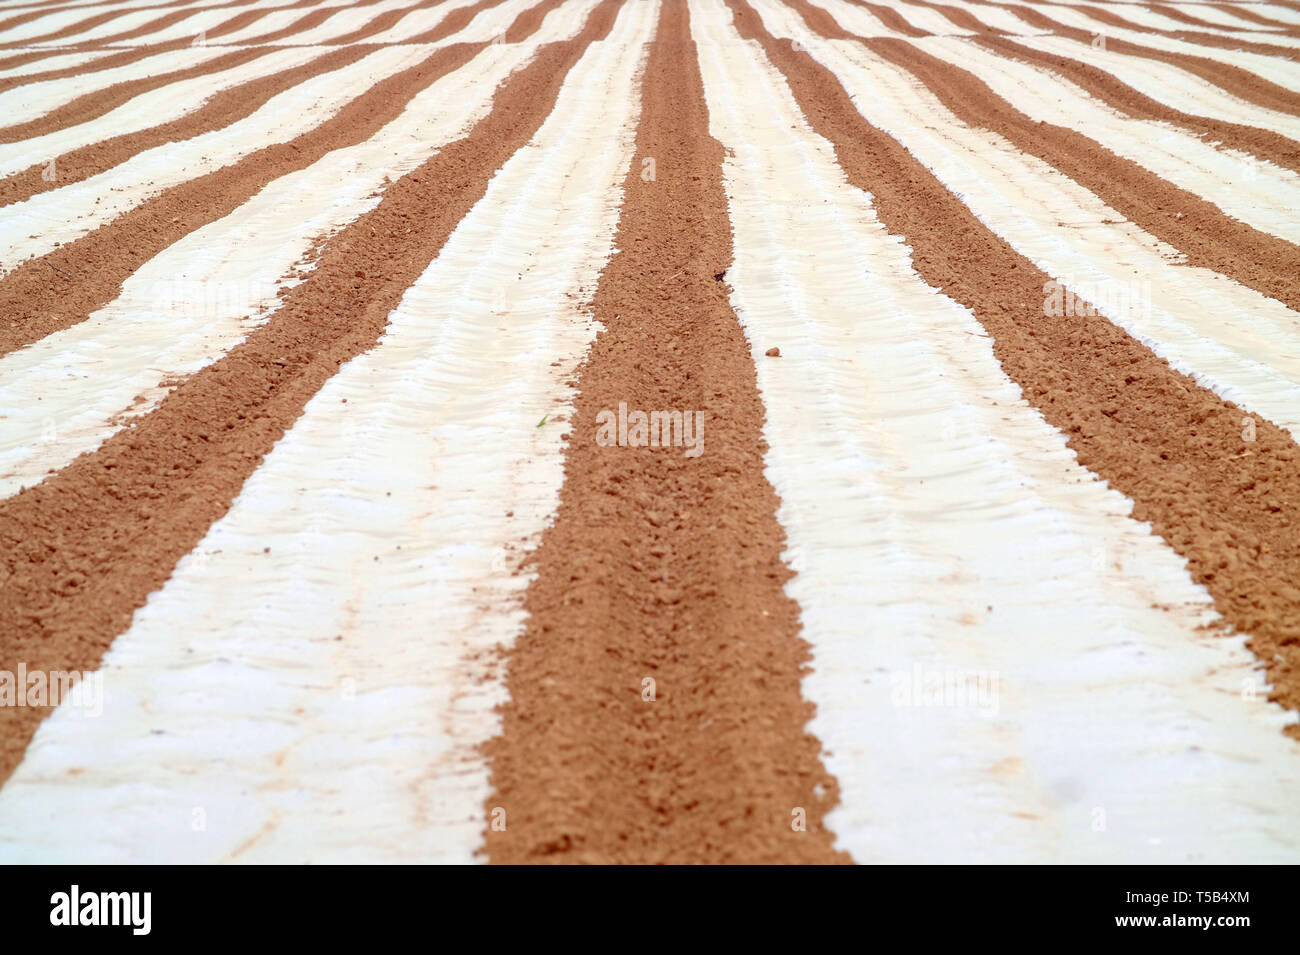 Barcombe, East Sussex, UK. 23rd Apr, 2019. Miles of plastic sheeting creates geometric patterns in farmland. The sheeting is used to help speed up germination of maize crops. Credit: Peter Cripps/Alamy Live News Stock Photo